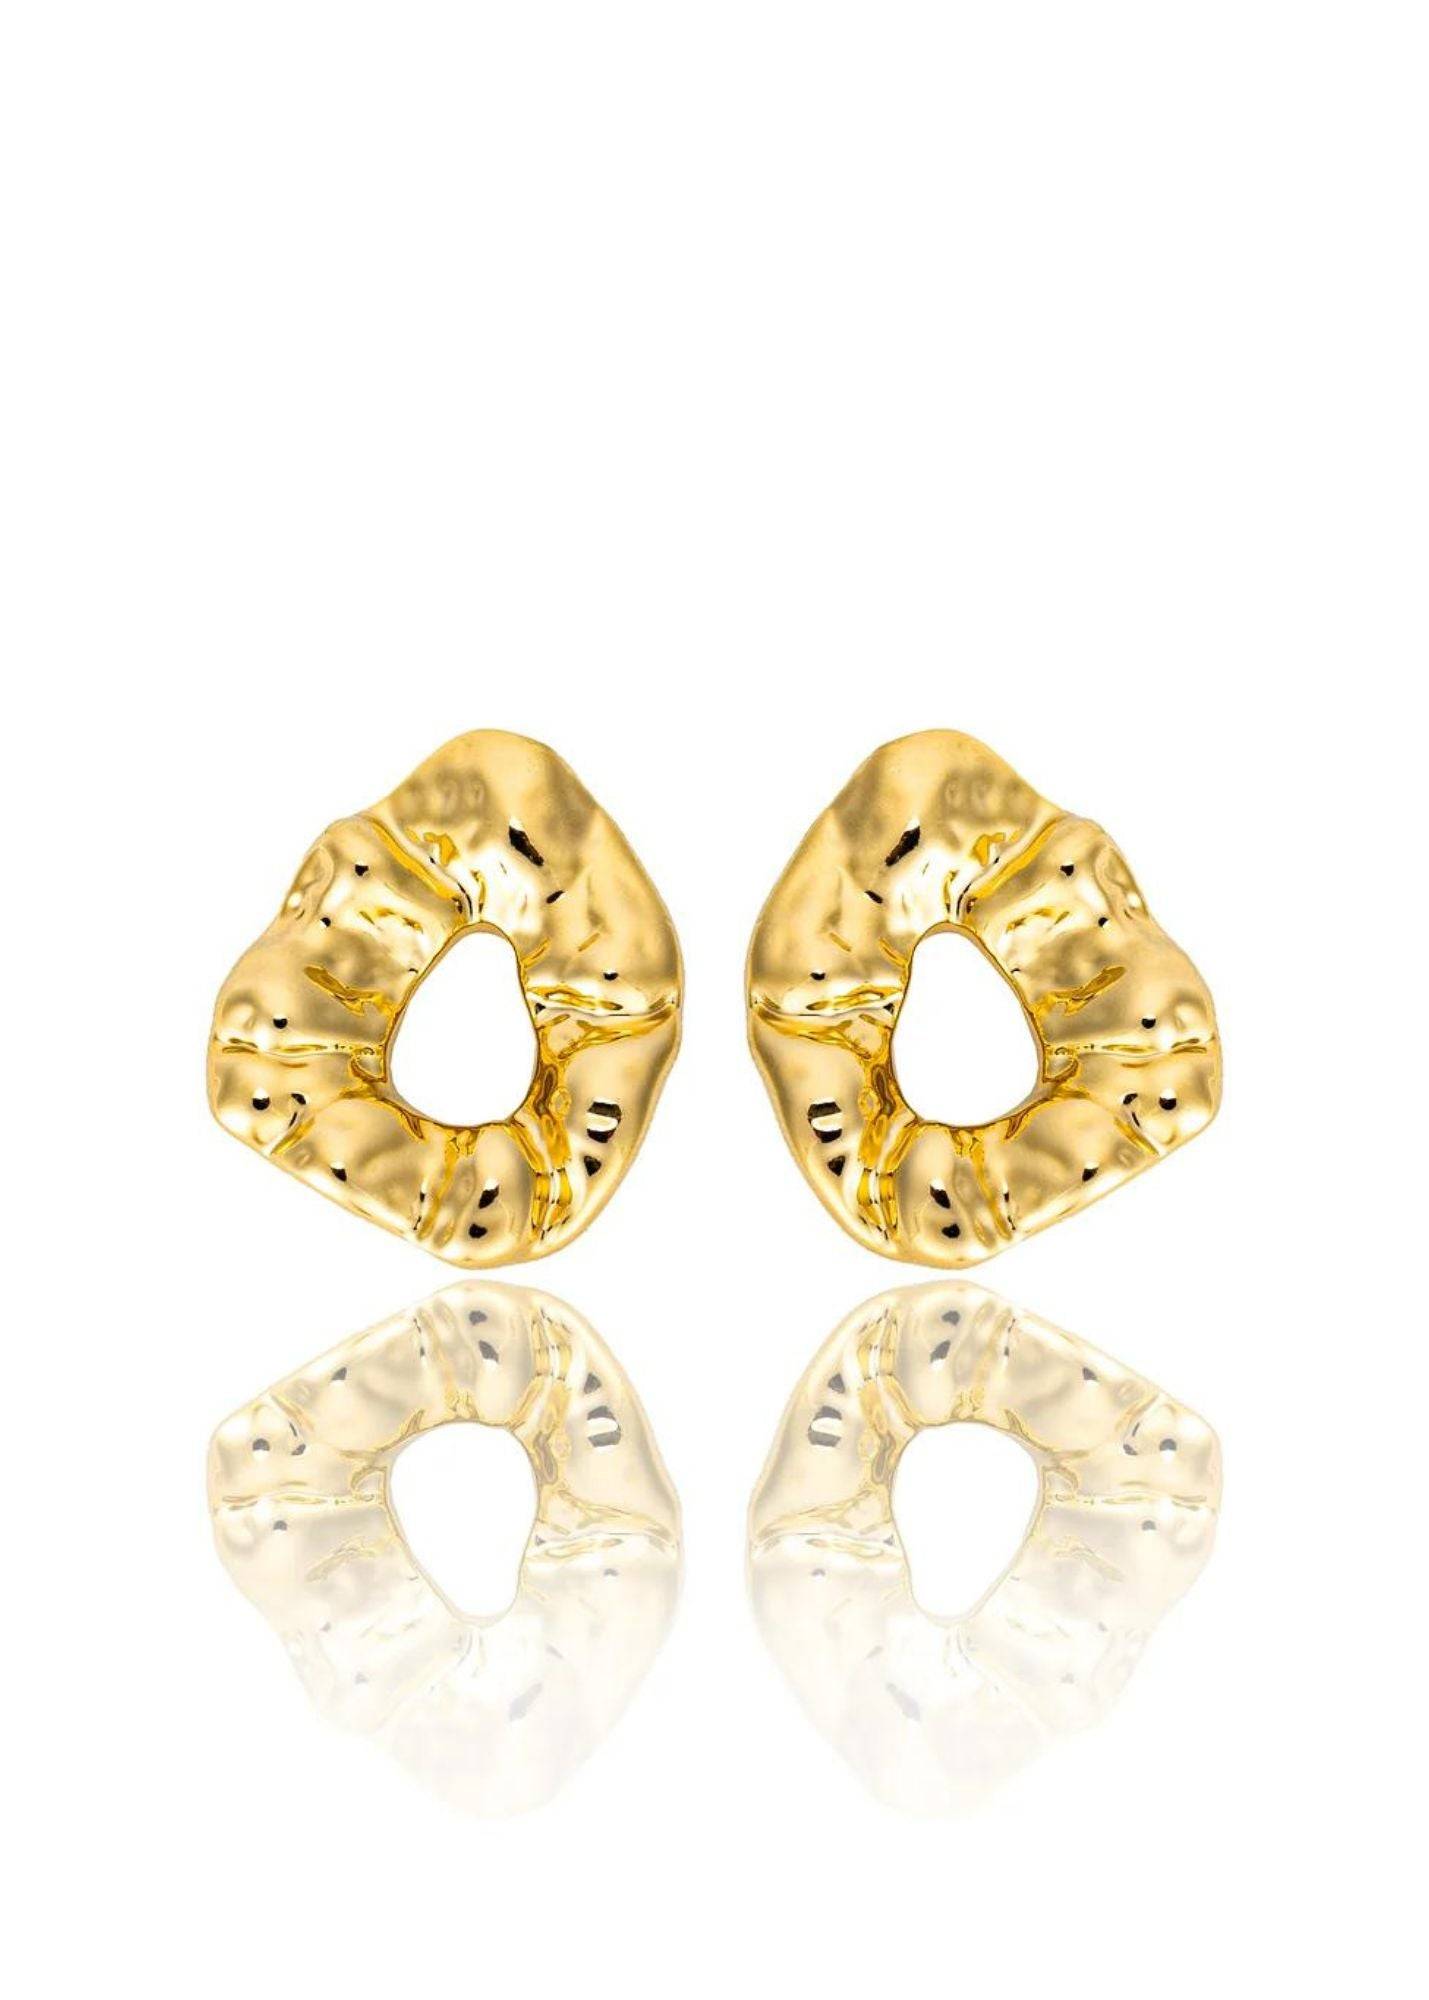 Textured Geometric Circular Statement Stud Earrings in 18K Gold Filled from Inaury.com